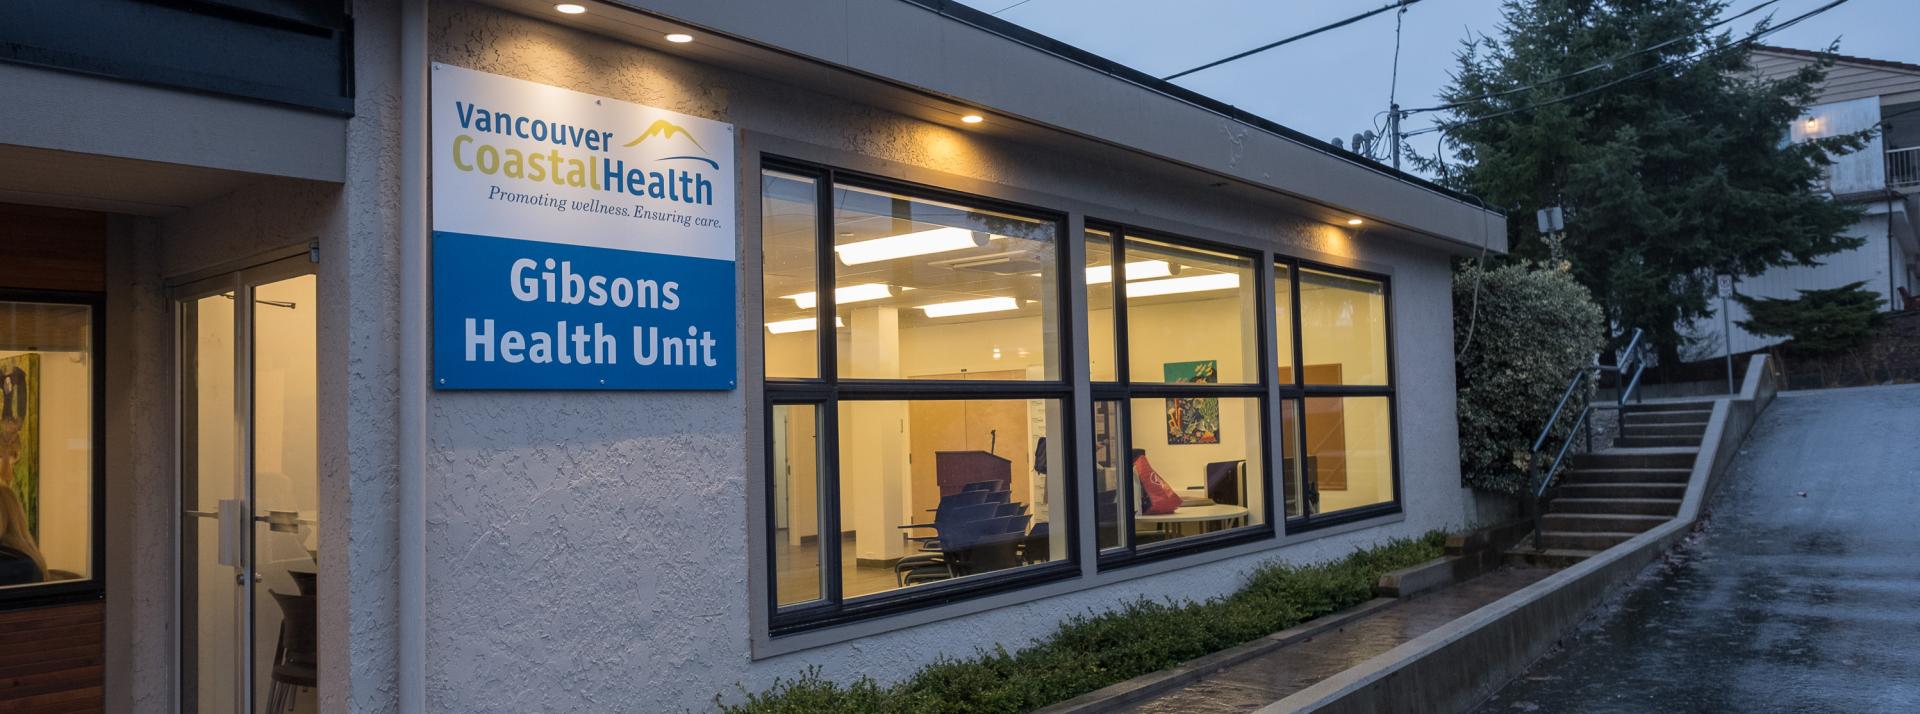 Exterior shot of Gibsons Health Unit at dusk.  The lights are on inside and the sign is visible on the outside.